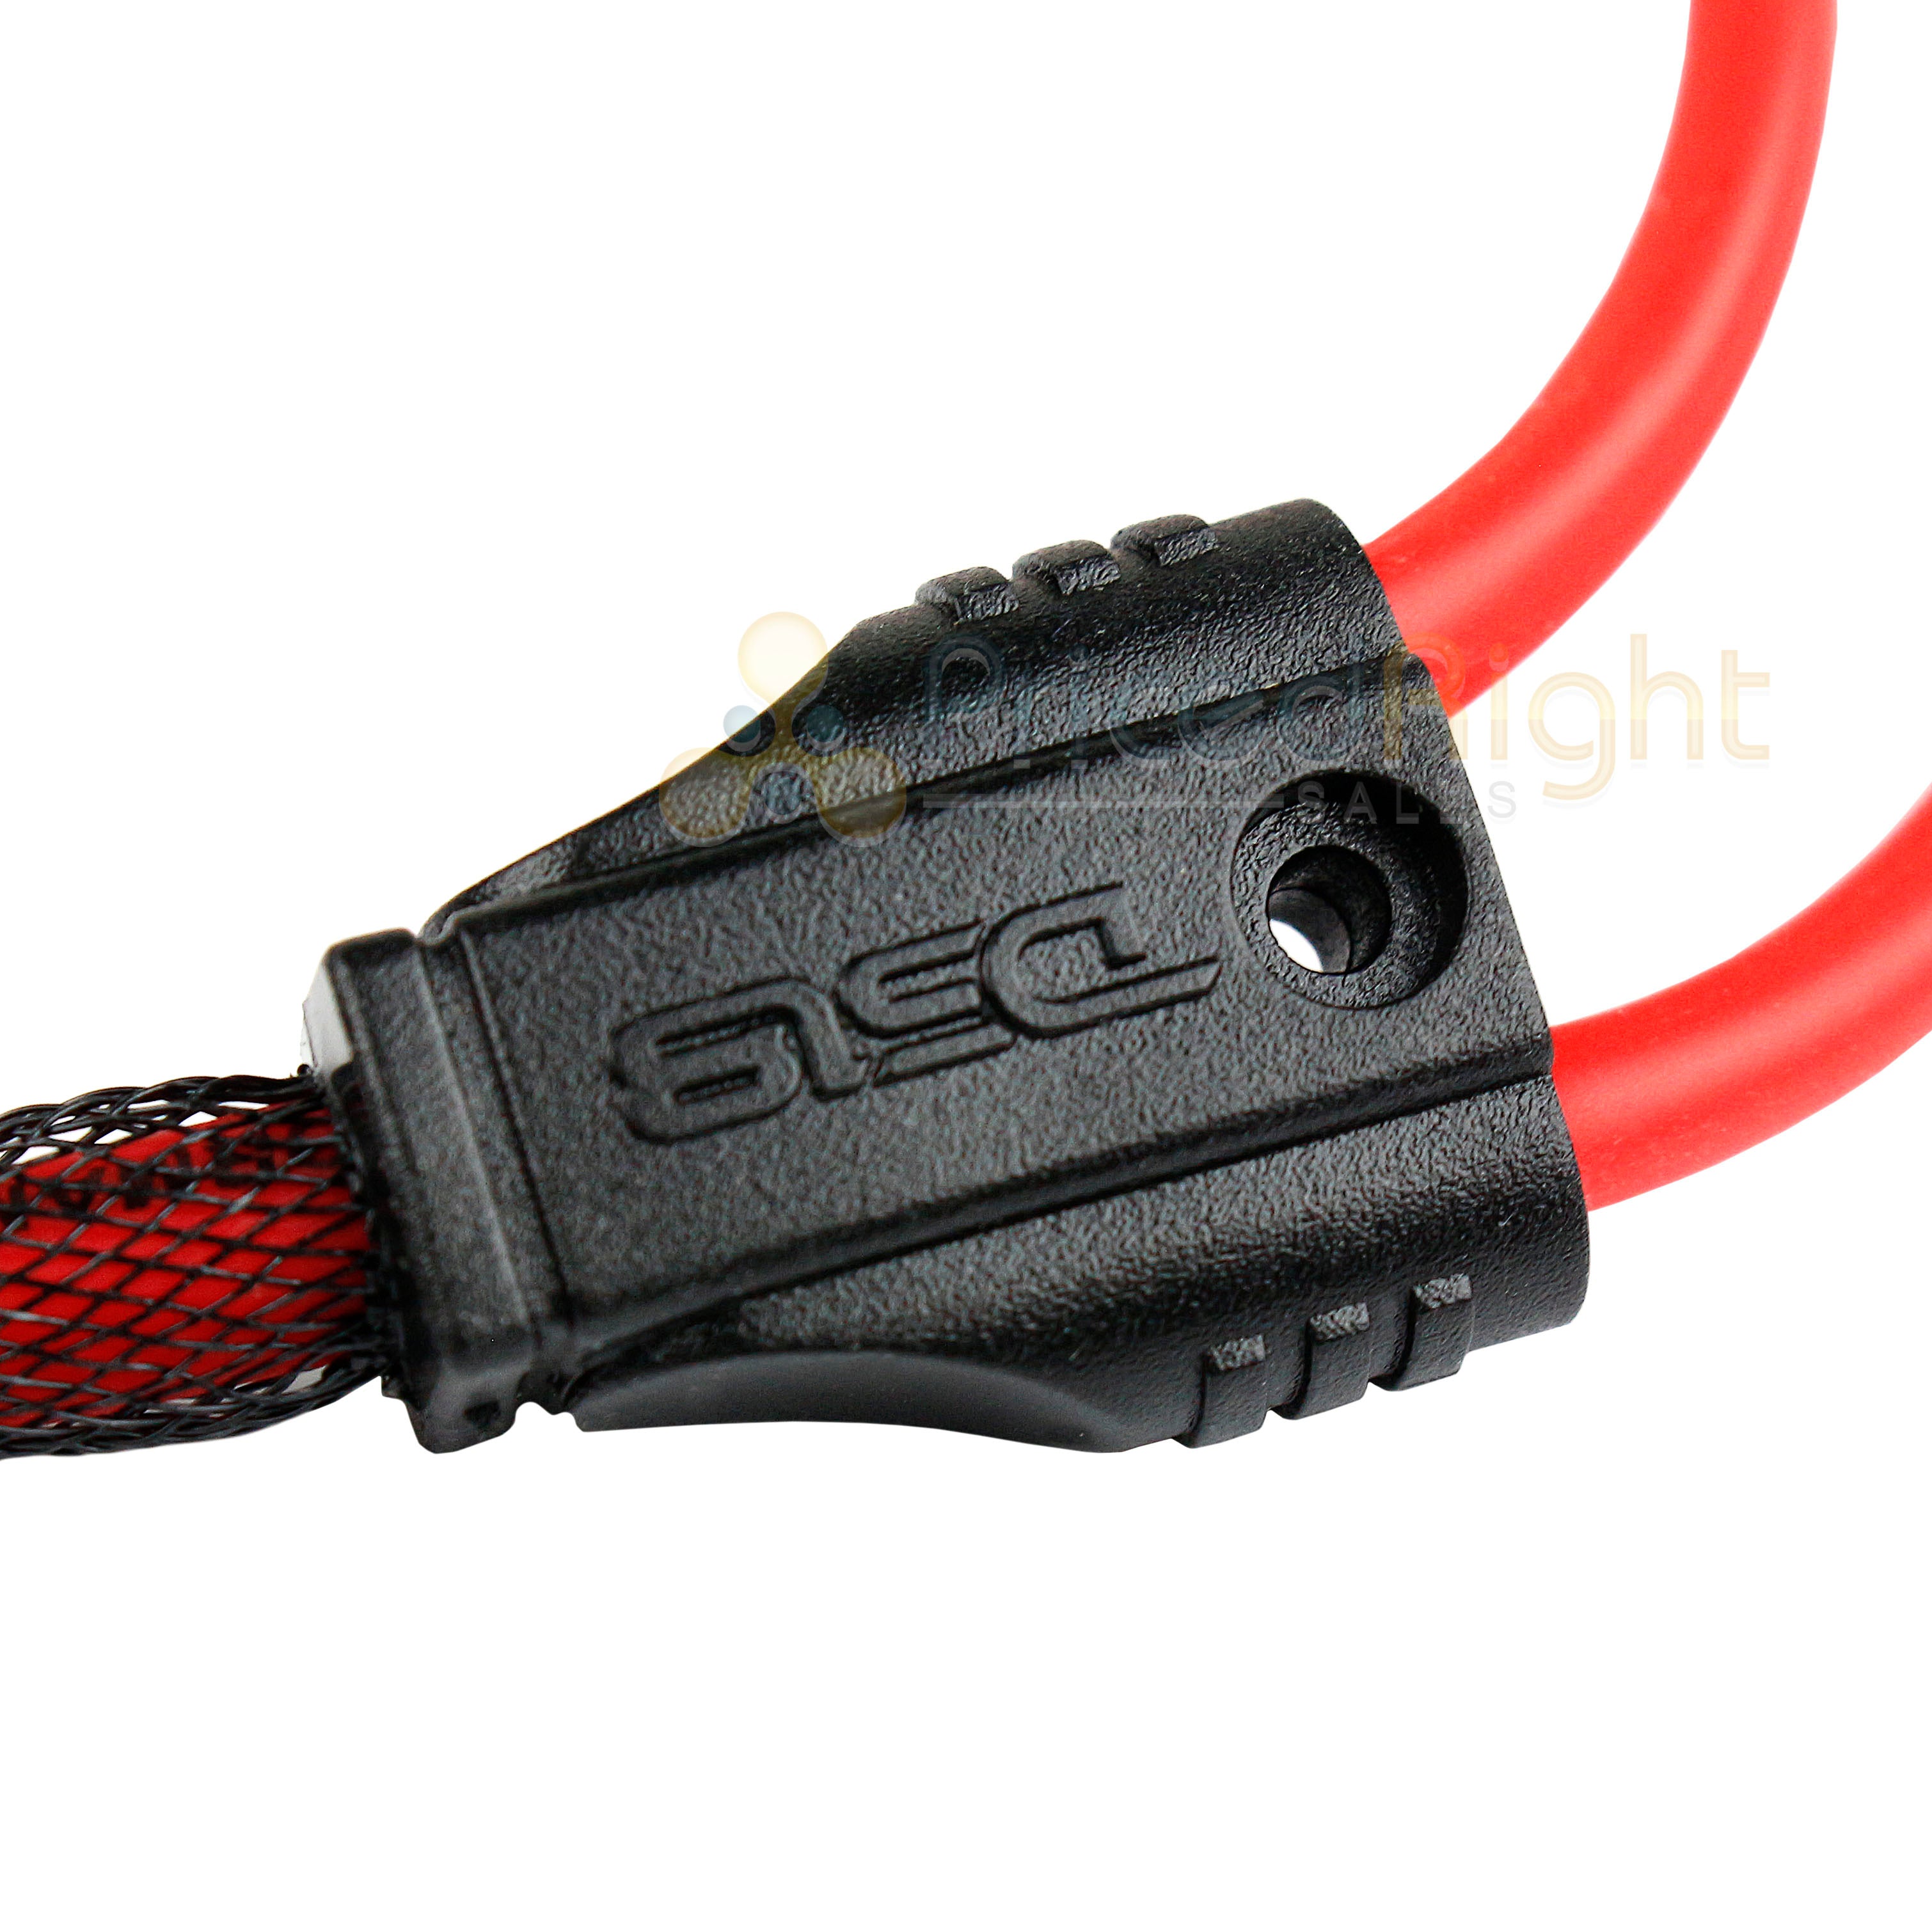 1 Female 2 Male RCA Splitter Audio Cable Competition Rated DS18 R1F2M